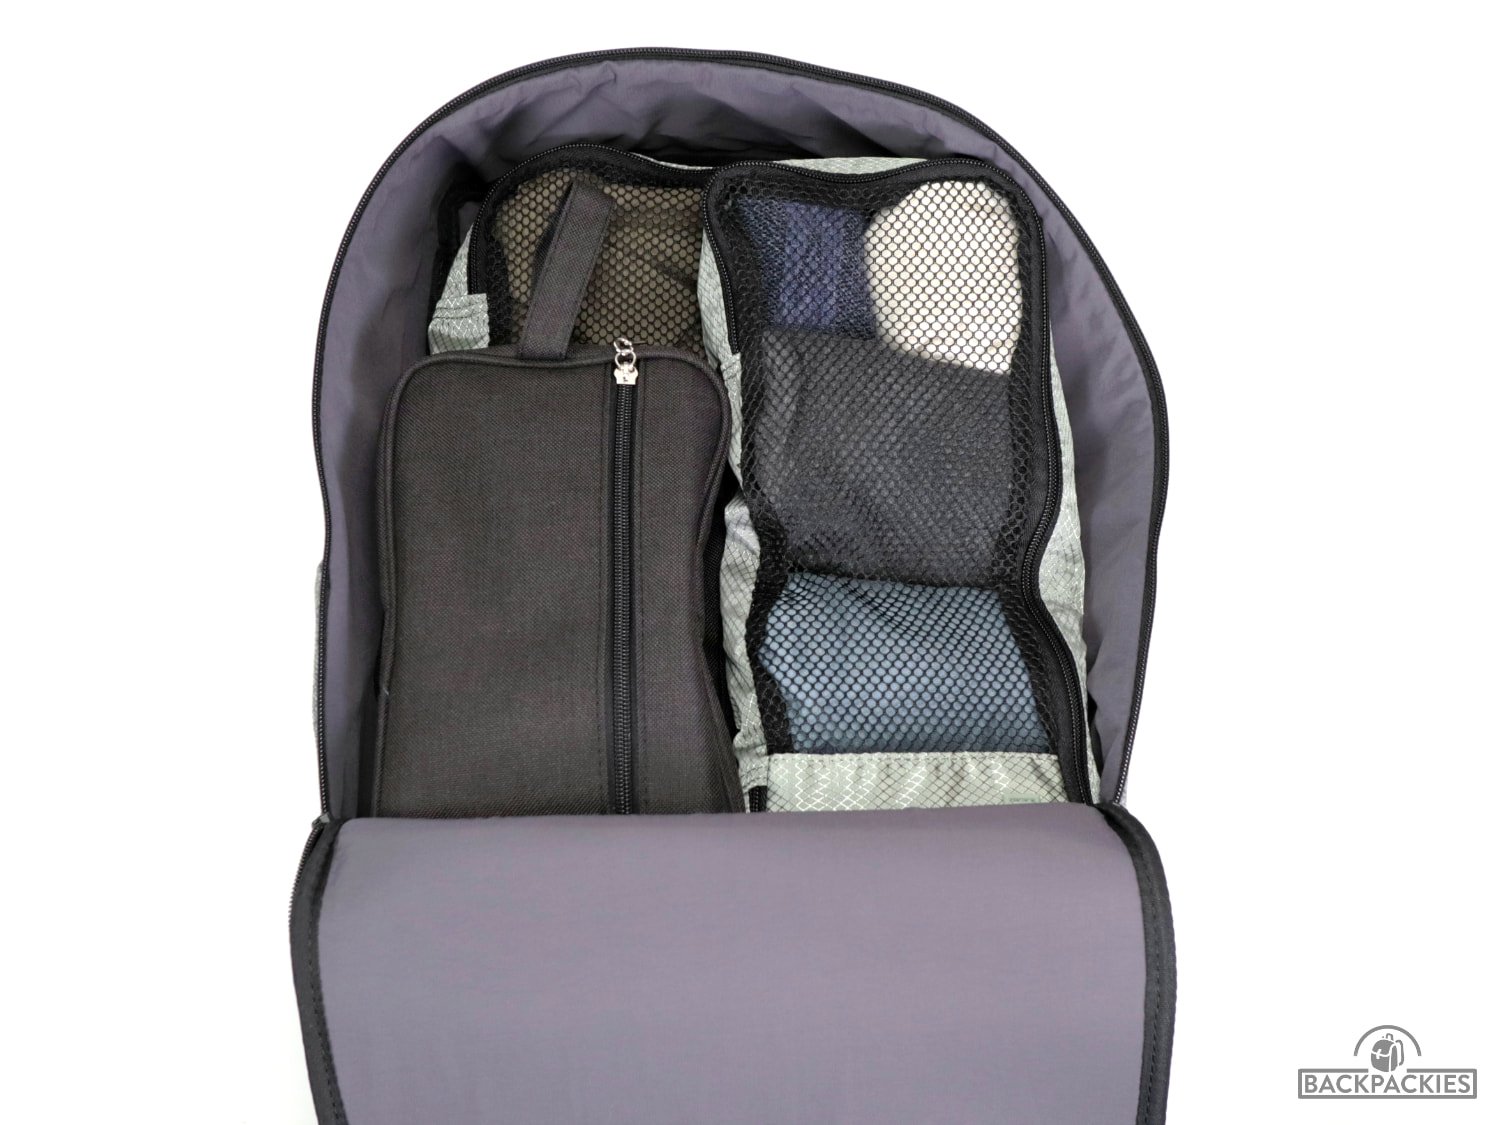 Main packing compartment inside the Public Rec Pro Pack Plus backpack